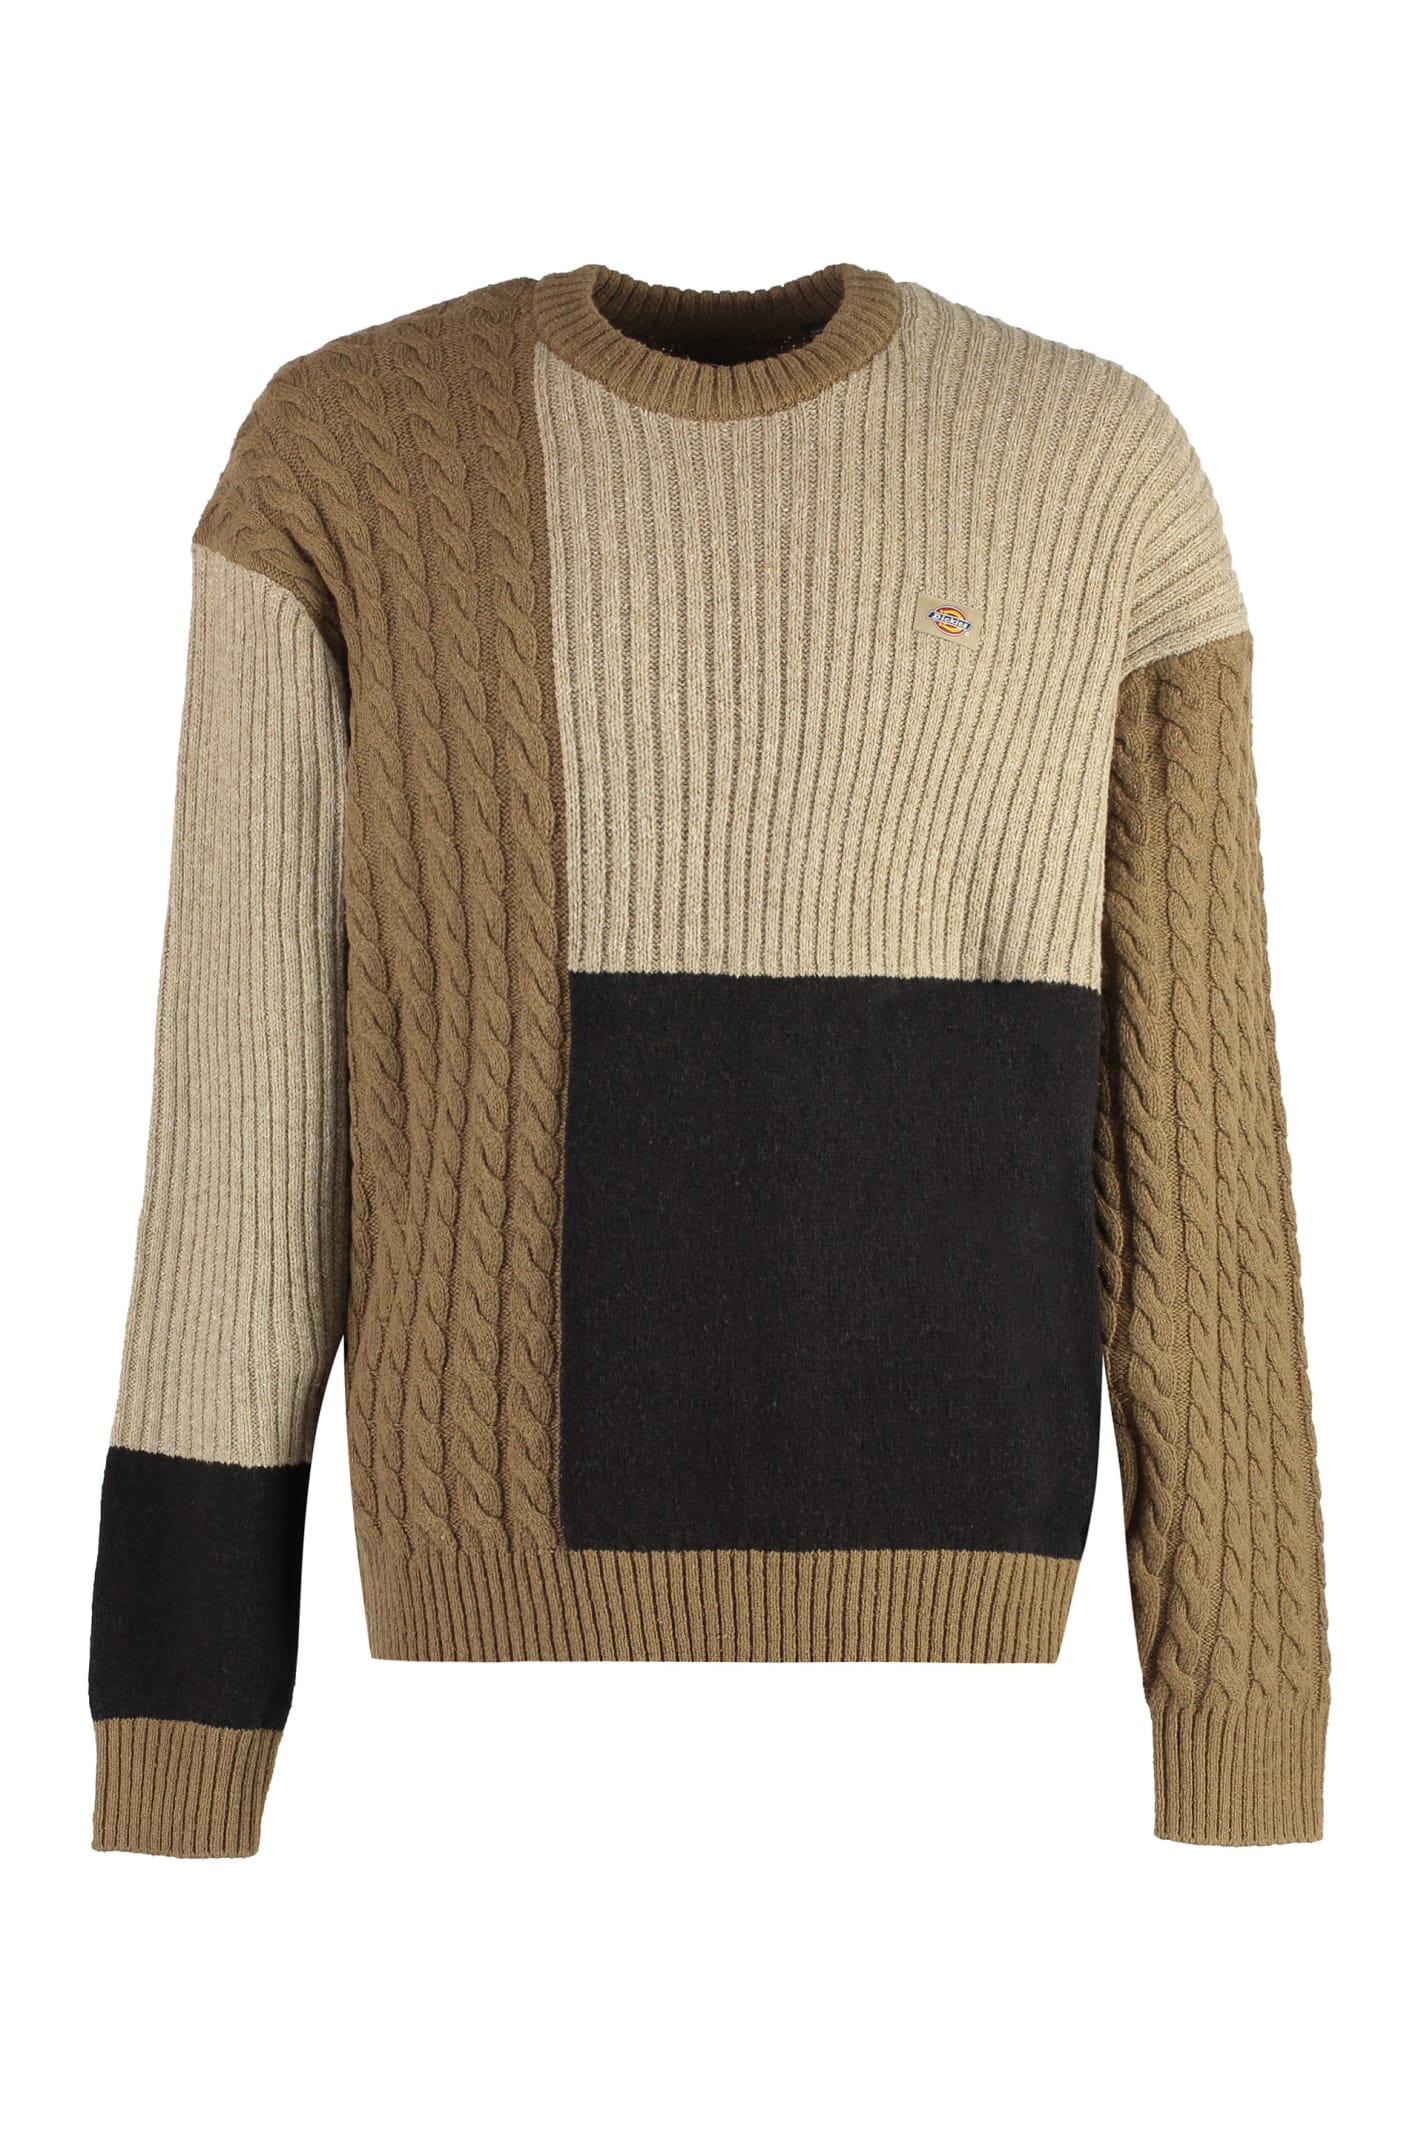 Dickies Lucas Cotton Blend Crew-neck Sweater - Beige - male - Size: Large